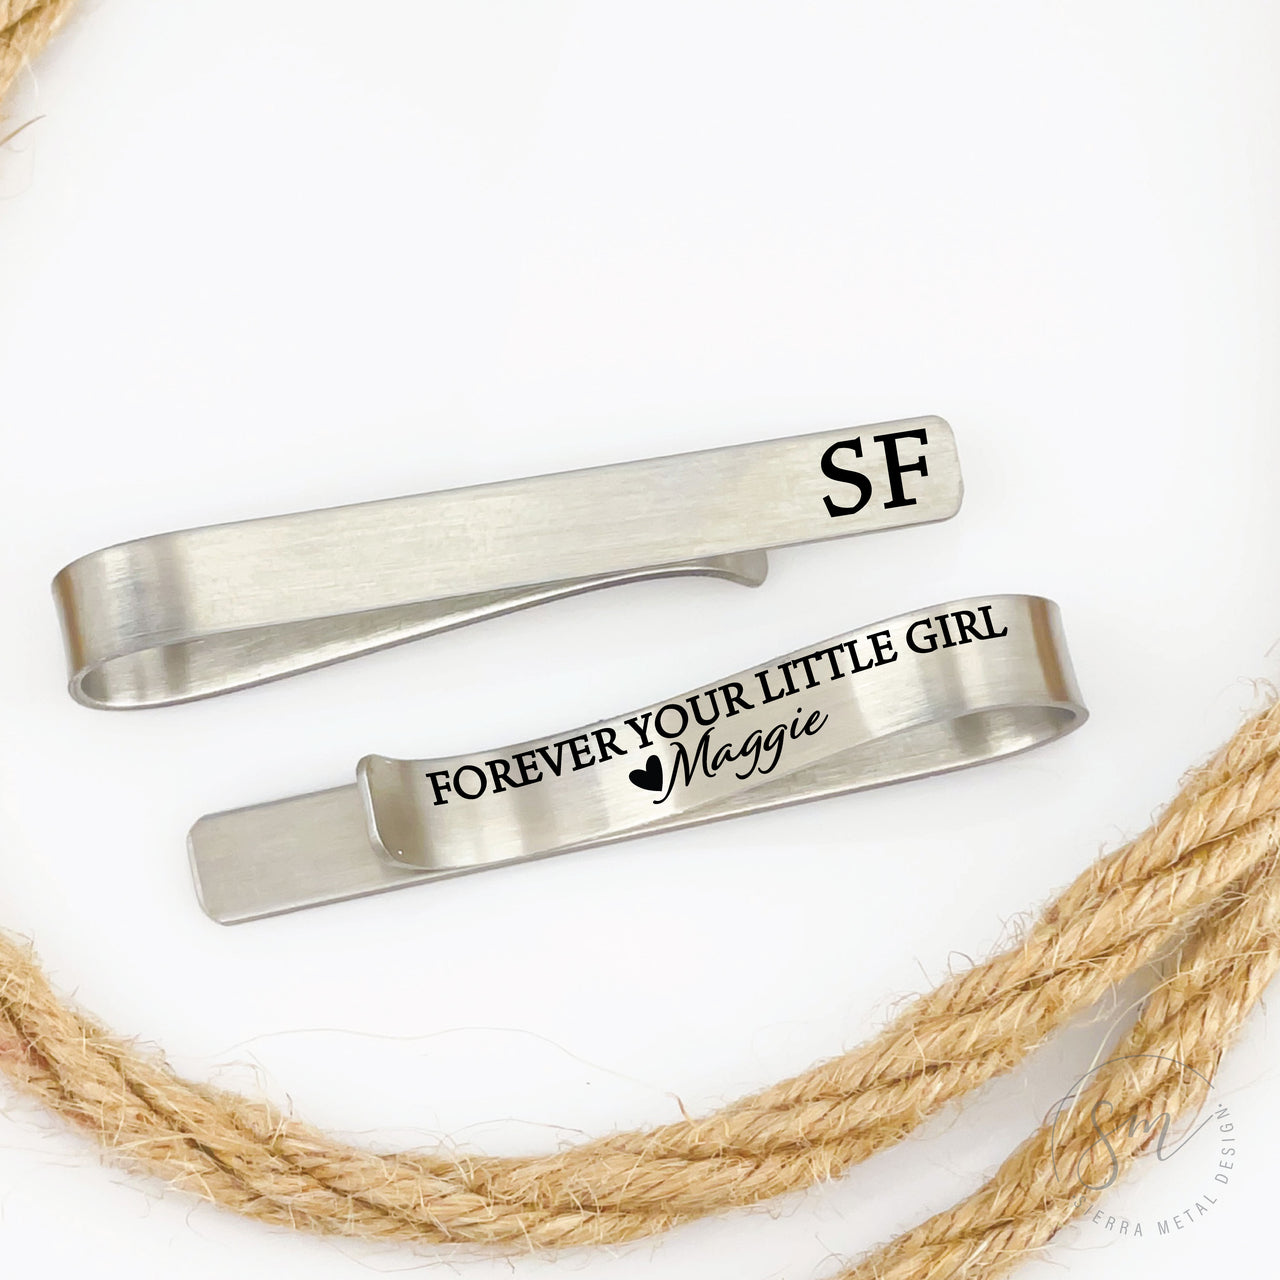 Forever Your Little Girl Tie Clip